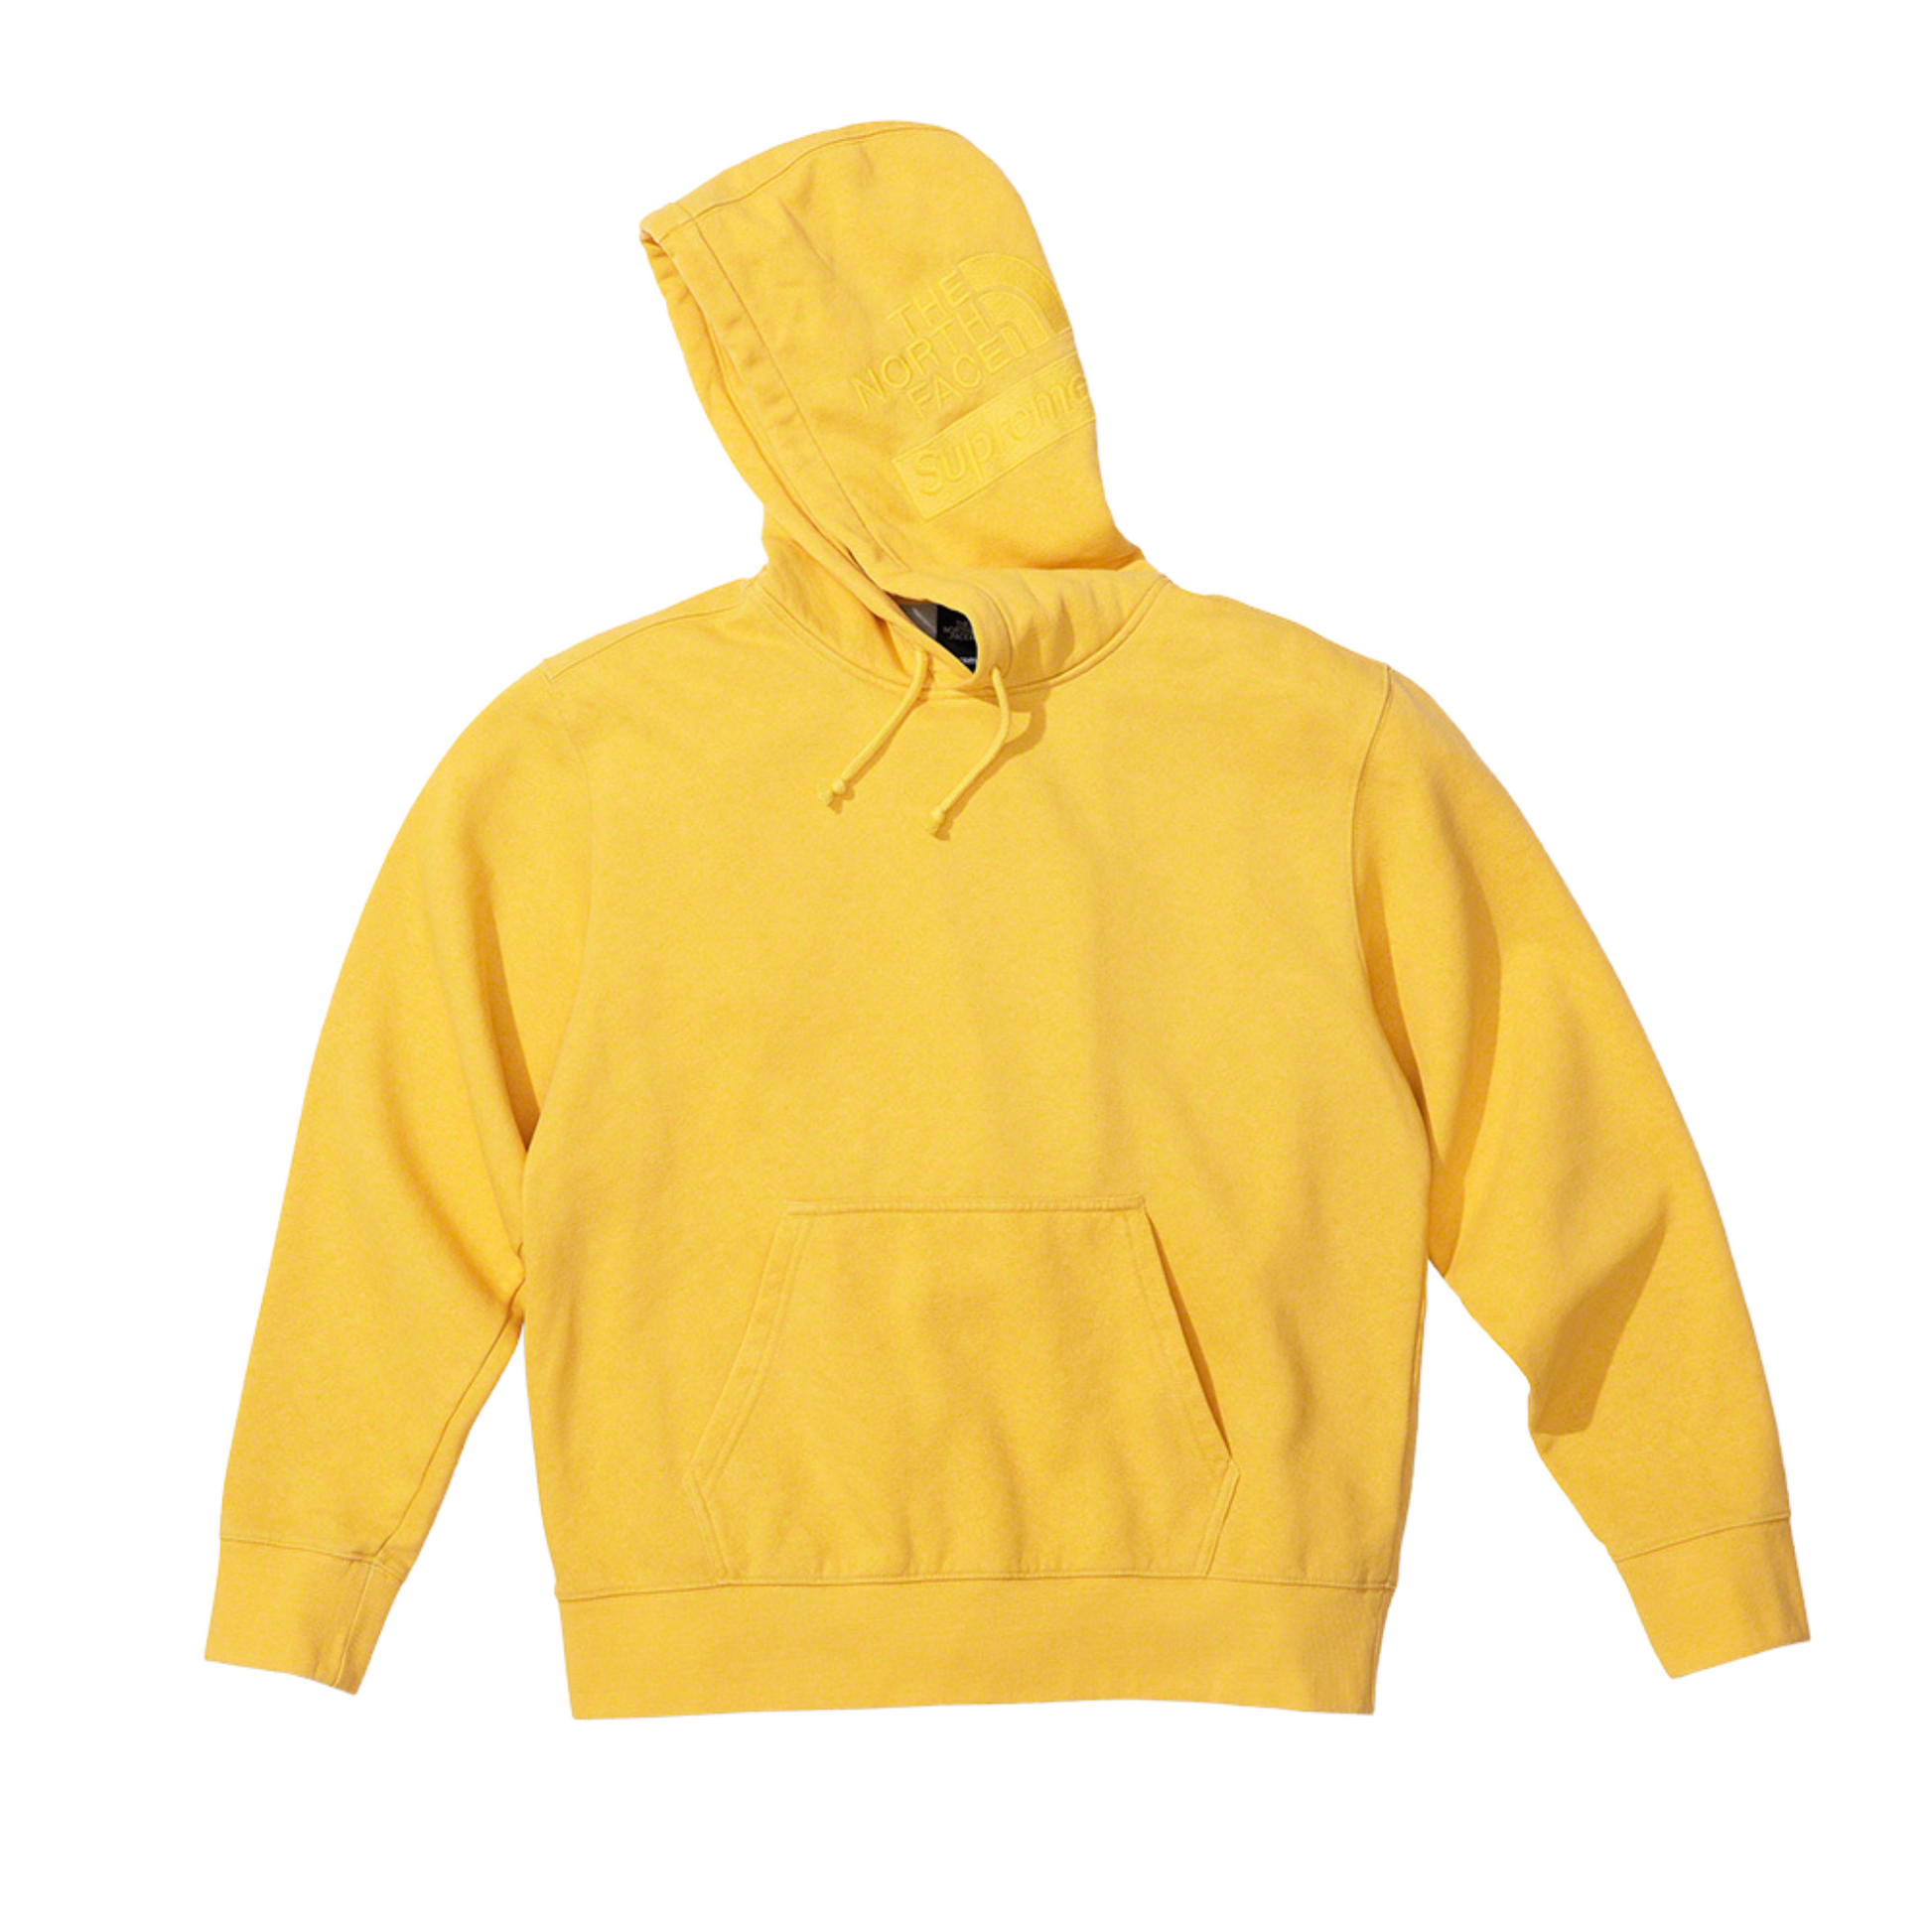 Supreme/The North Face Pigment Printed Hooded Sweatshirt – The